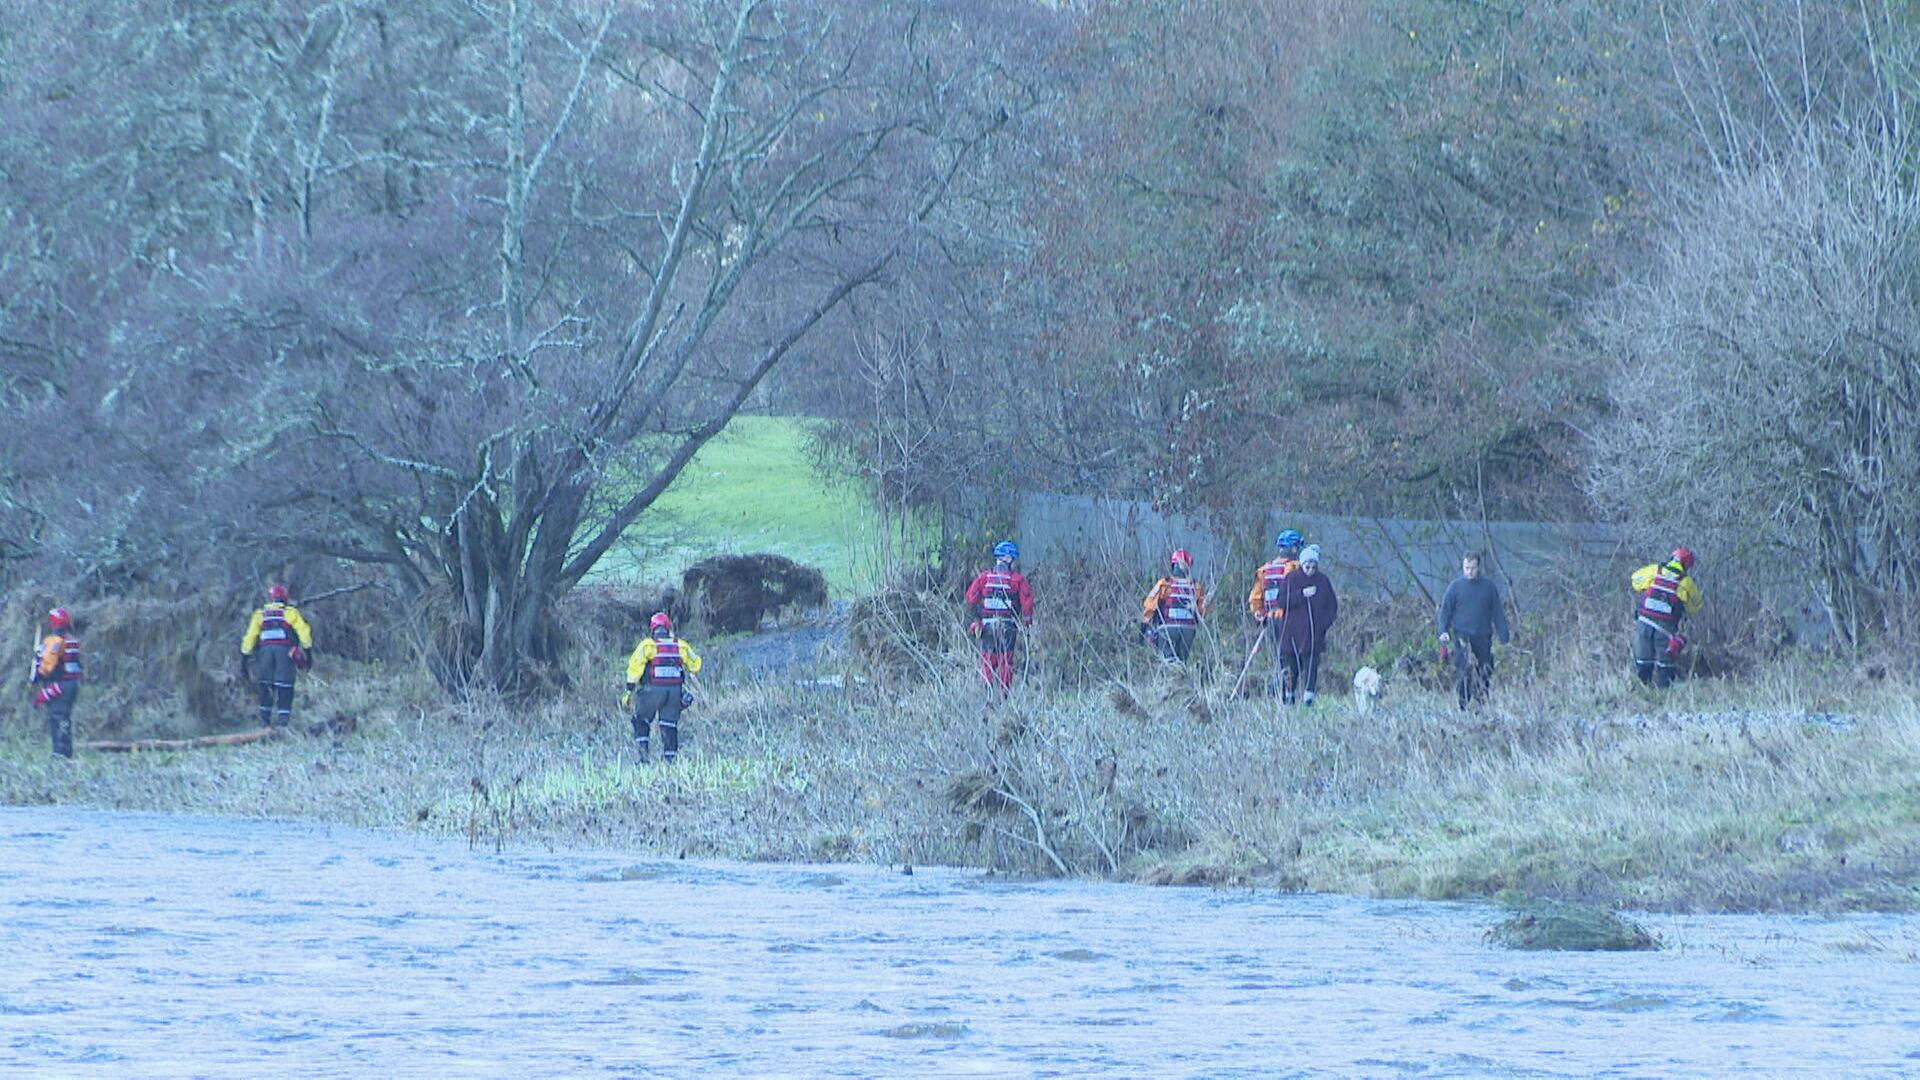 Searches operation for Ms Nairn, who was last seen in the water near Monymusk.